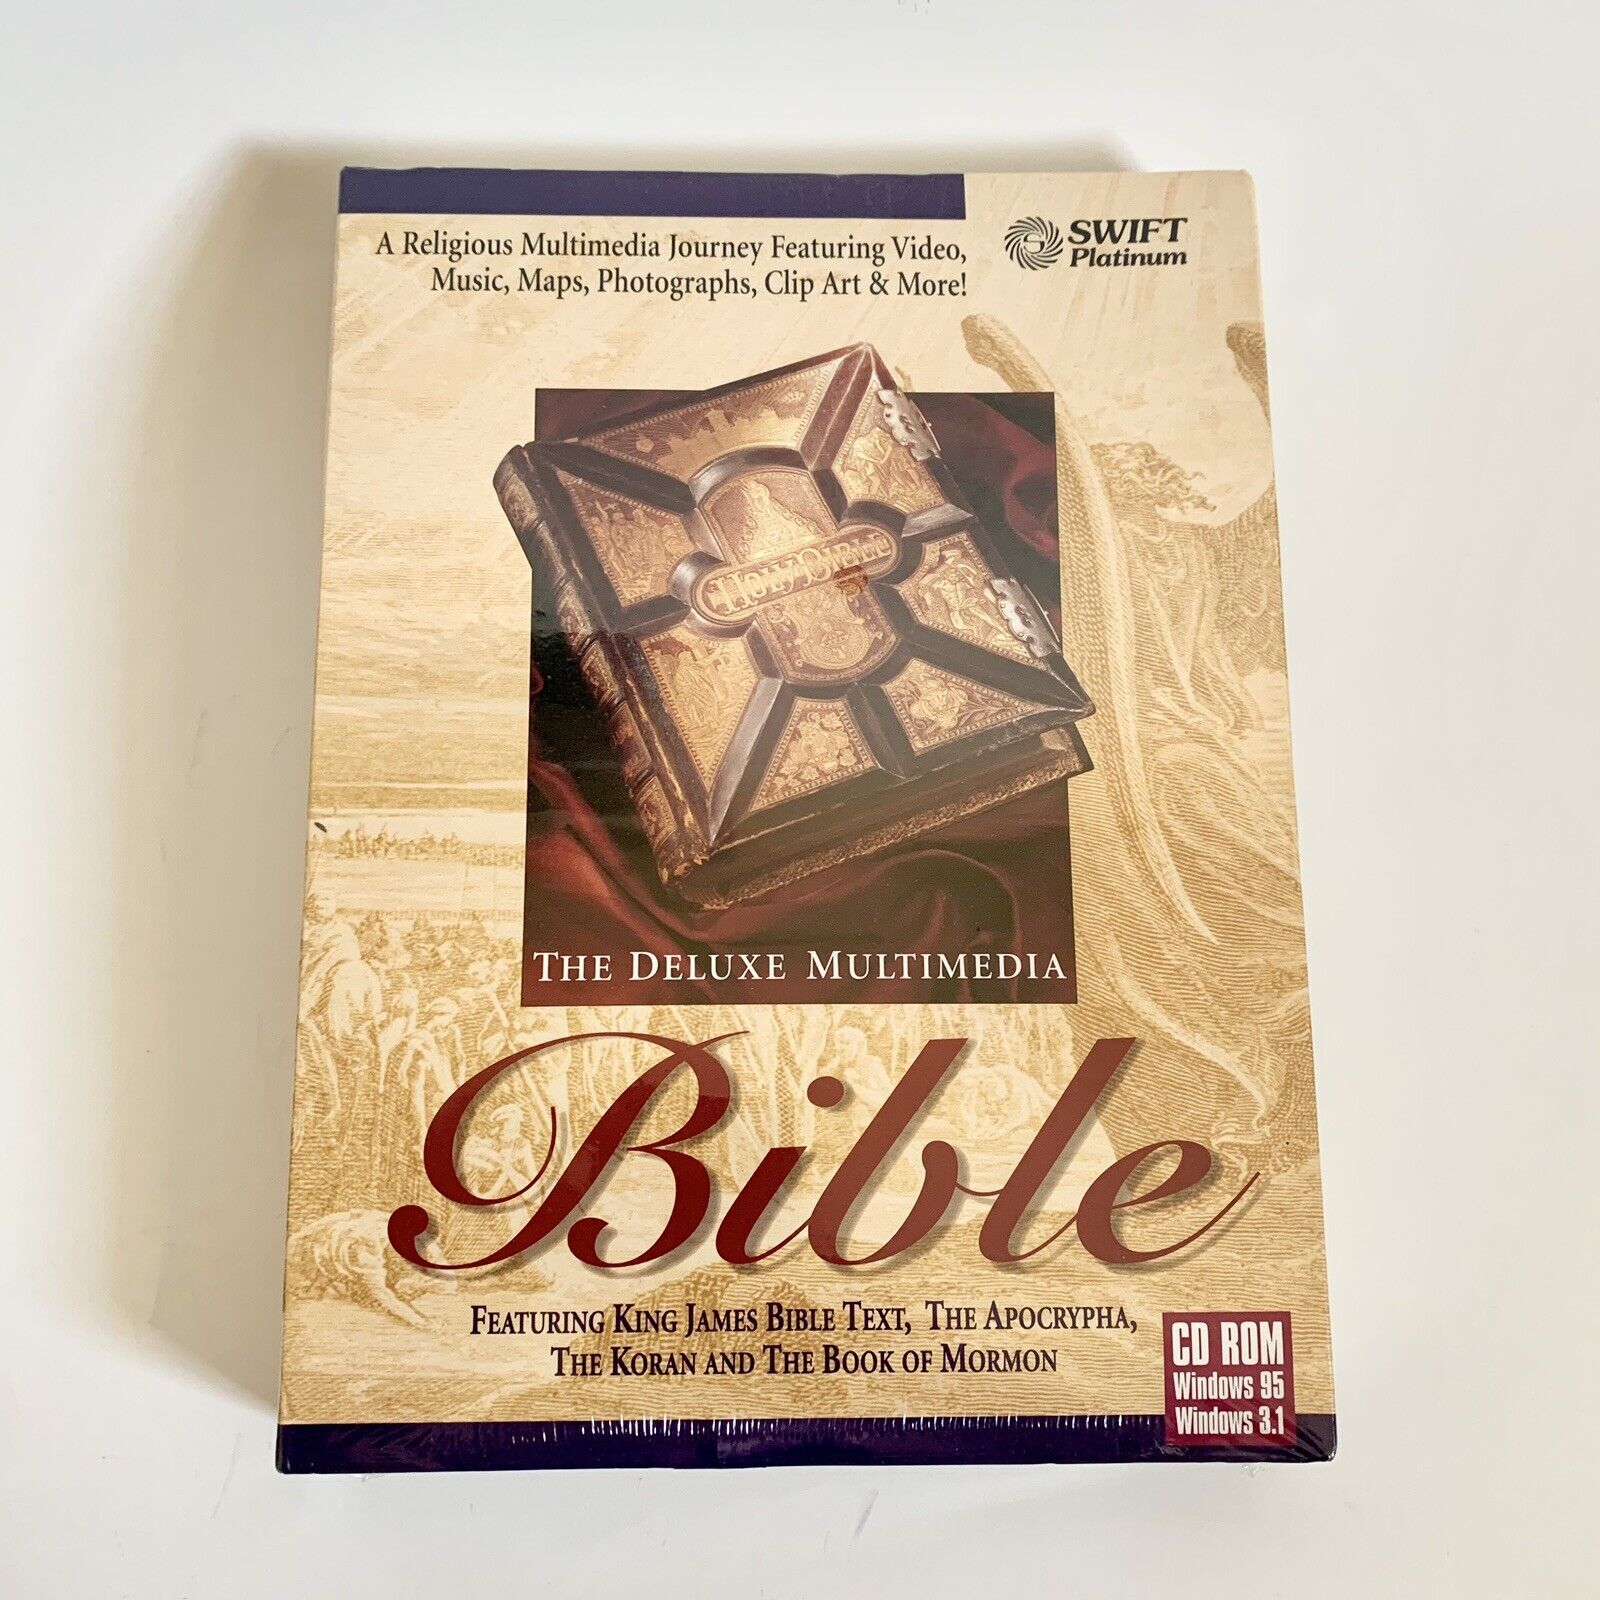 The Deluxe Multimedia Bible-Swift Platinum *New And Sealed*